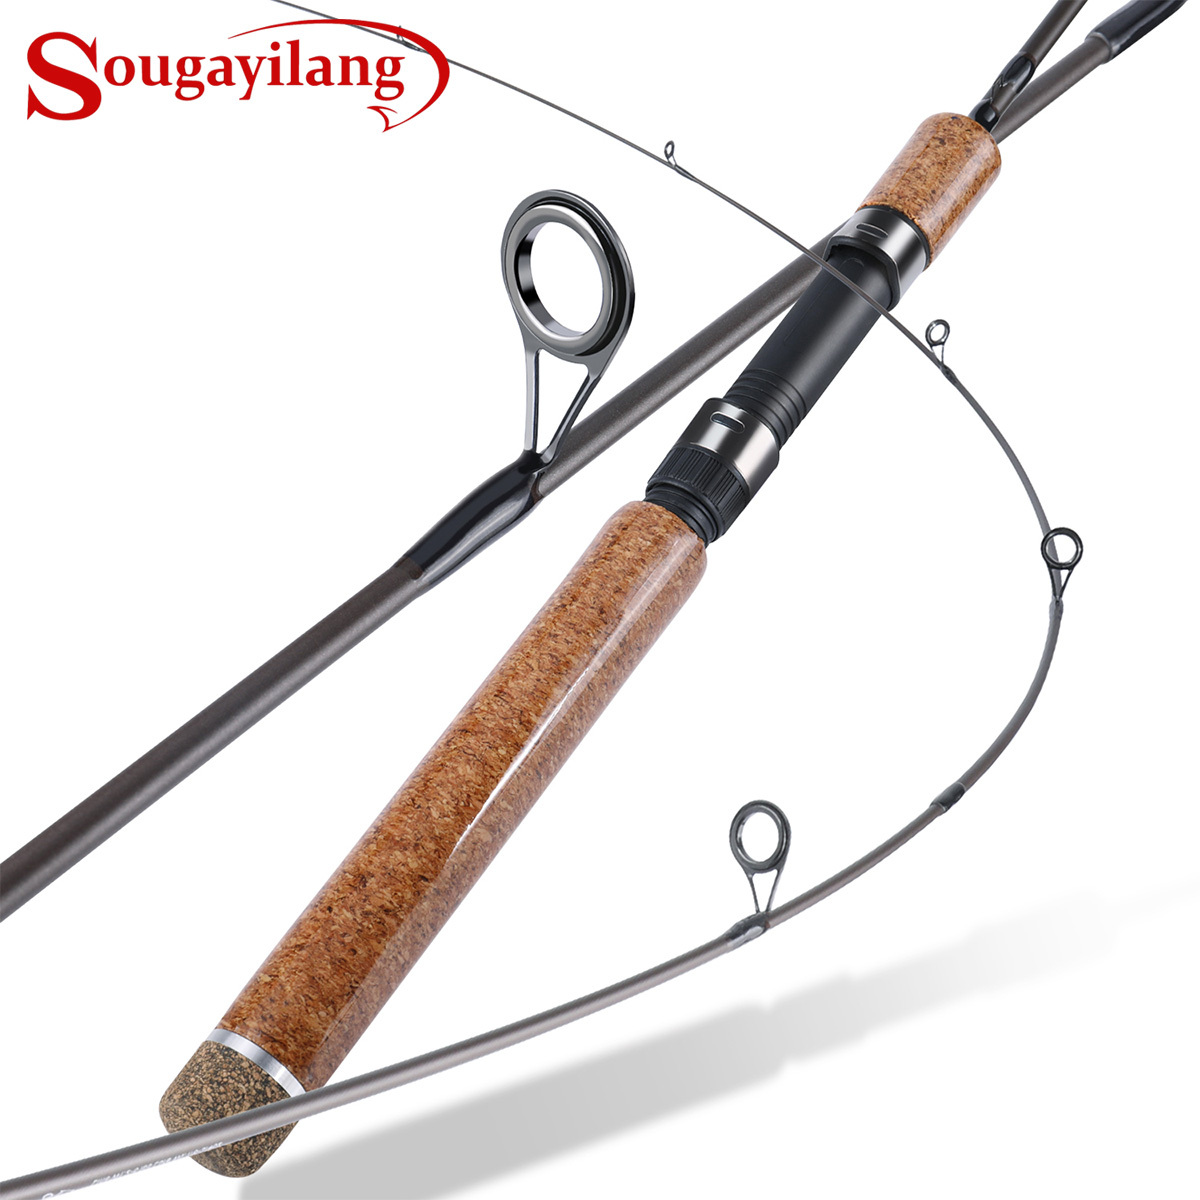 Sougayilang Ultralight Fishing Rod Reel Combos,Portable 2-Piece Spinning  Fishing Pole with Stainless Steel Guides